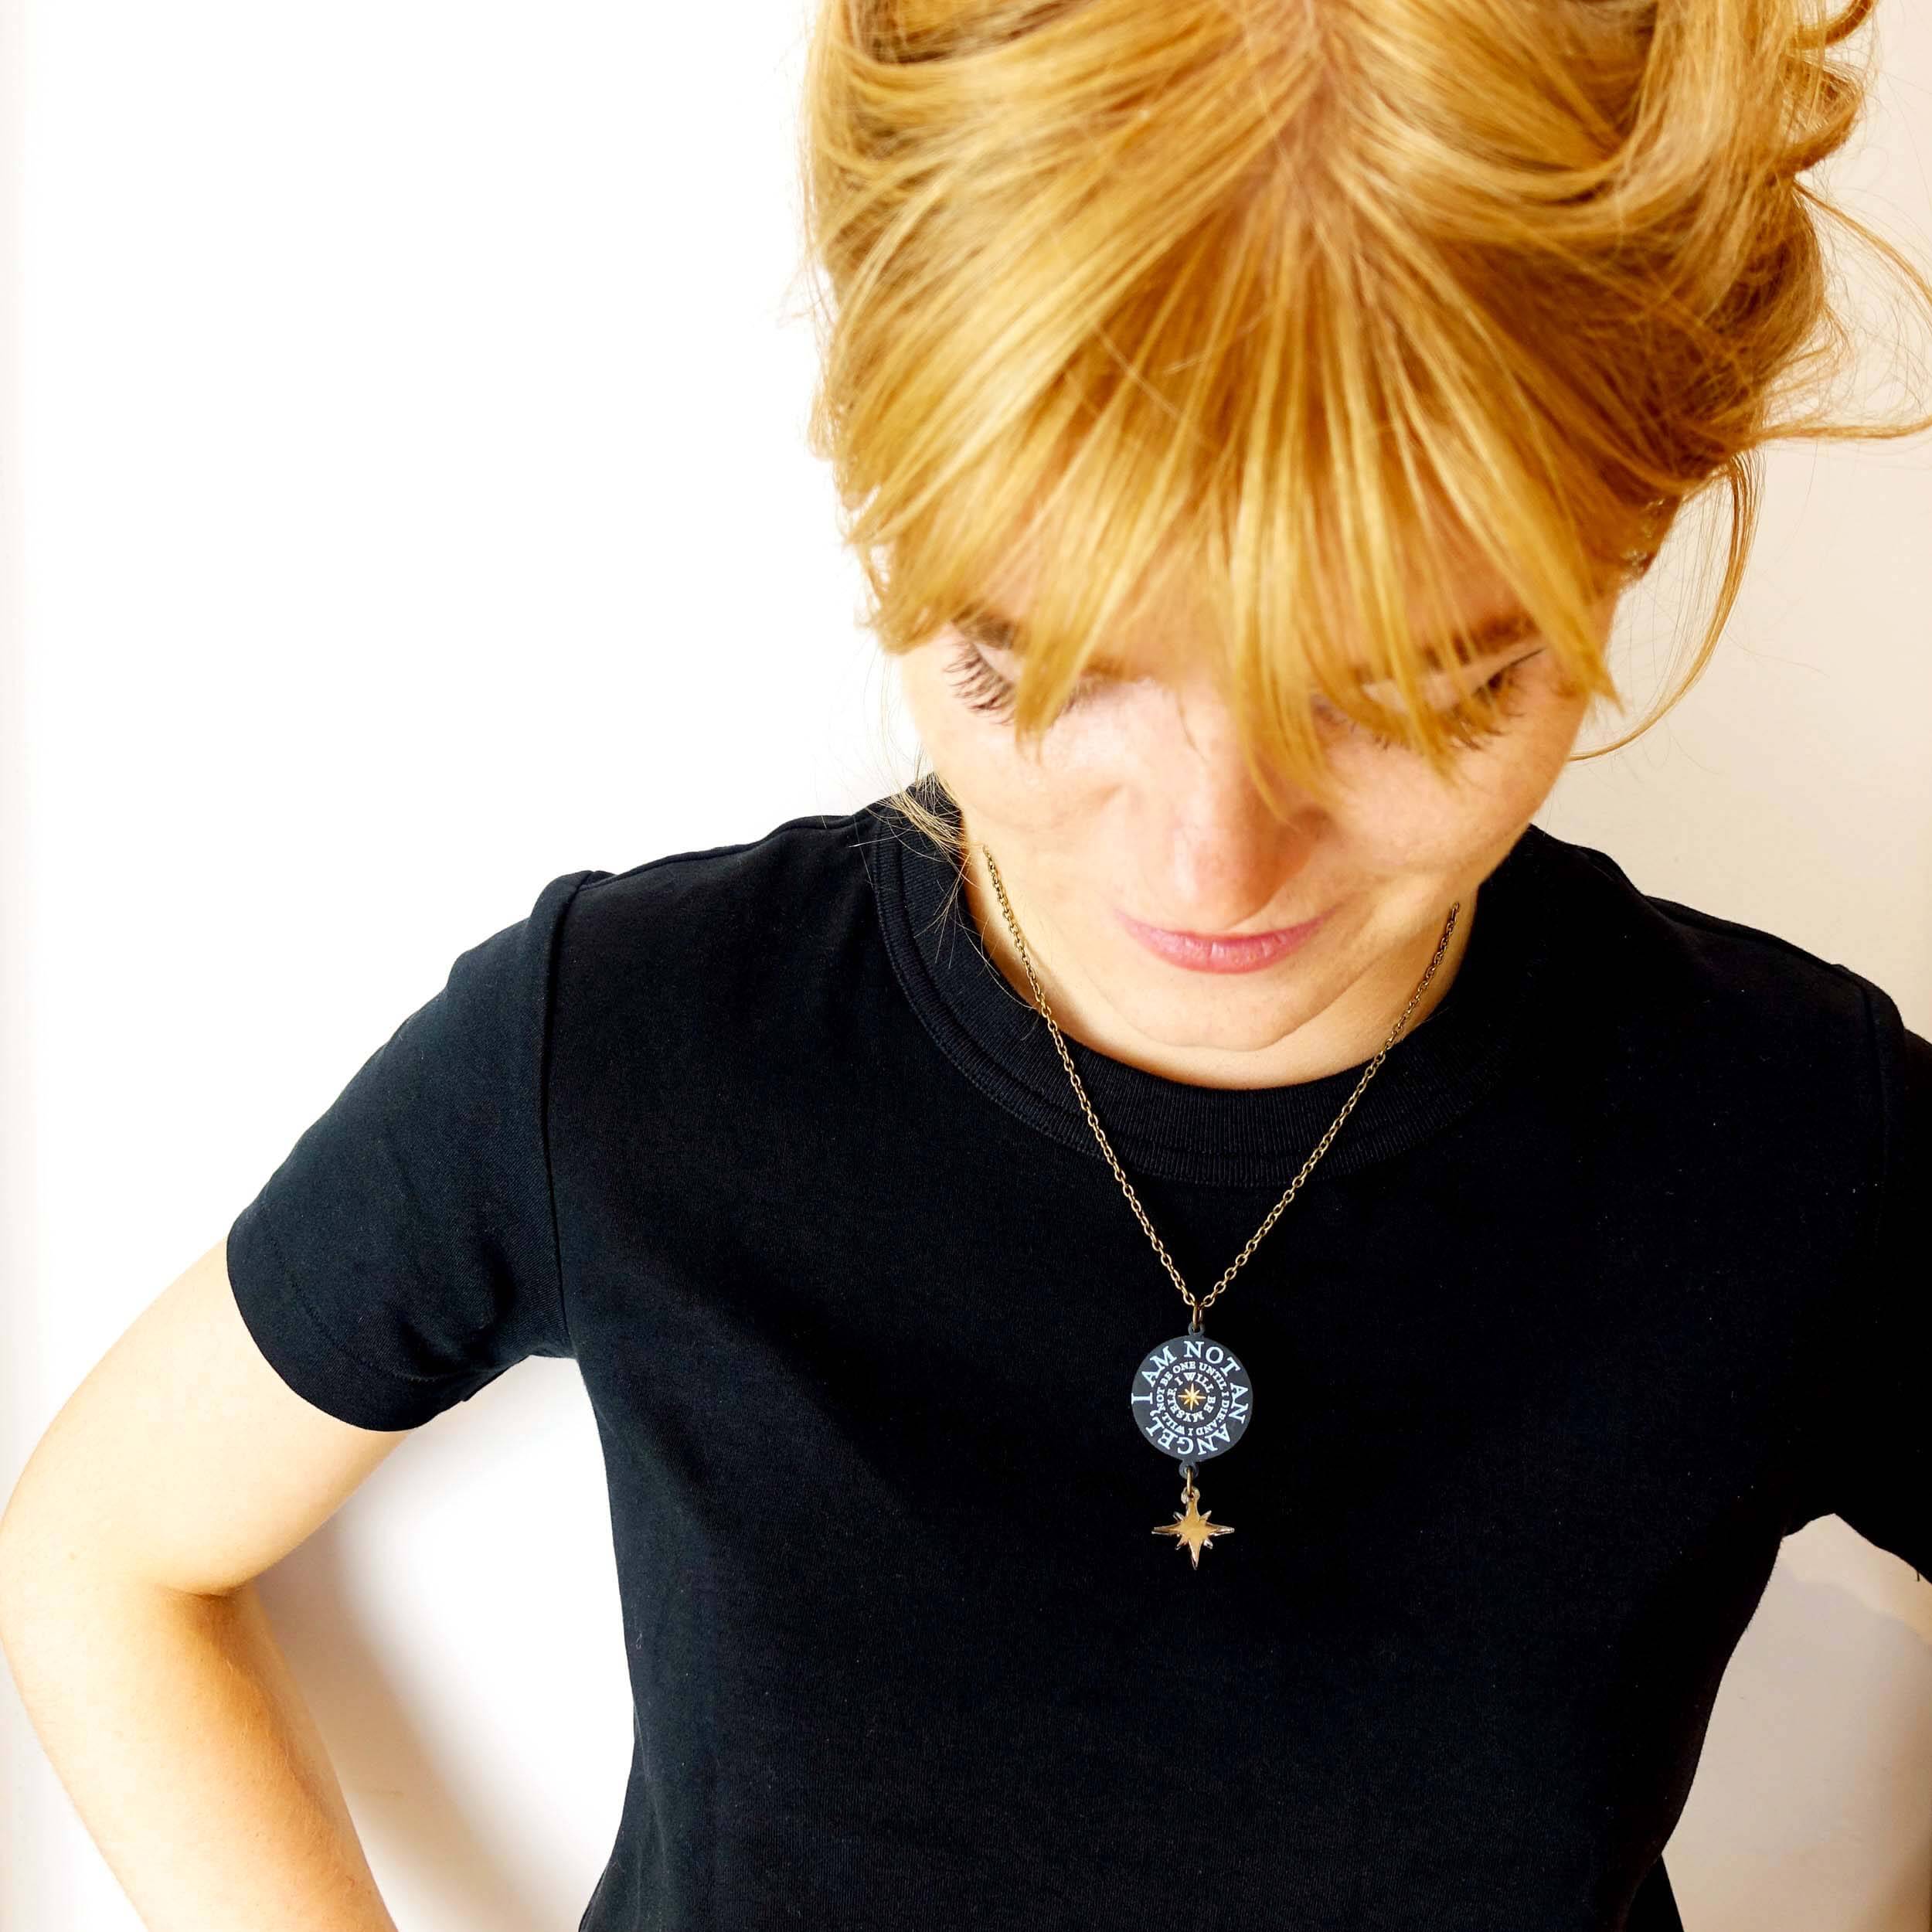 Eliza wears the 'I am not an angel' necklace from The Brontë Collection designed by Sarah Day for Wear and Resist.